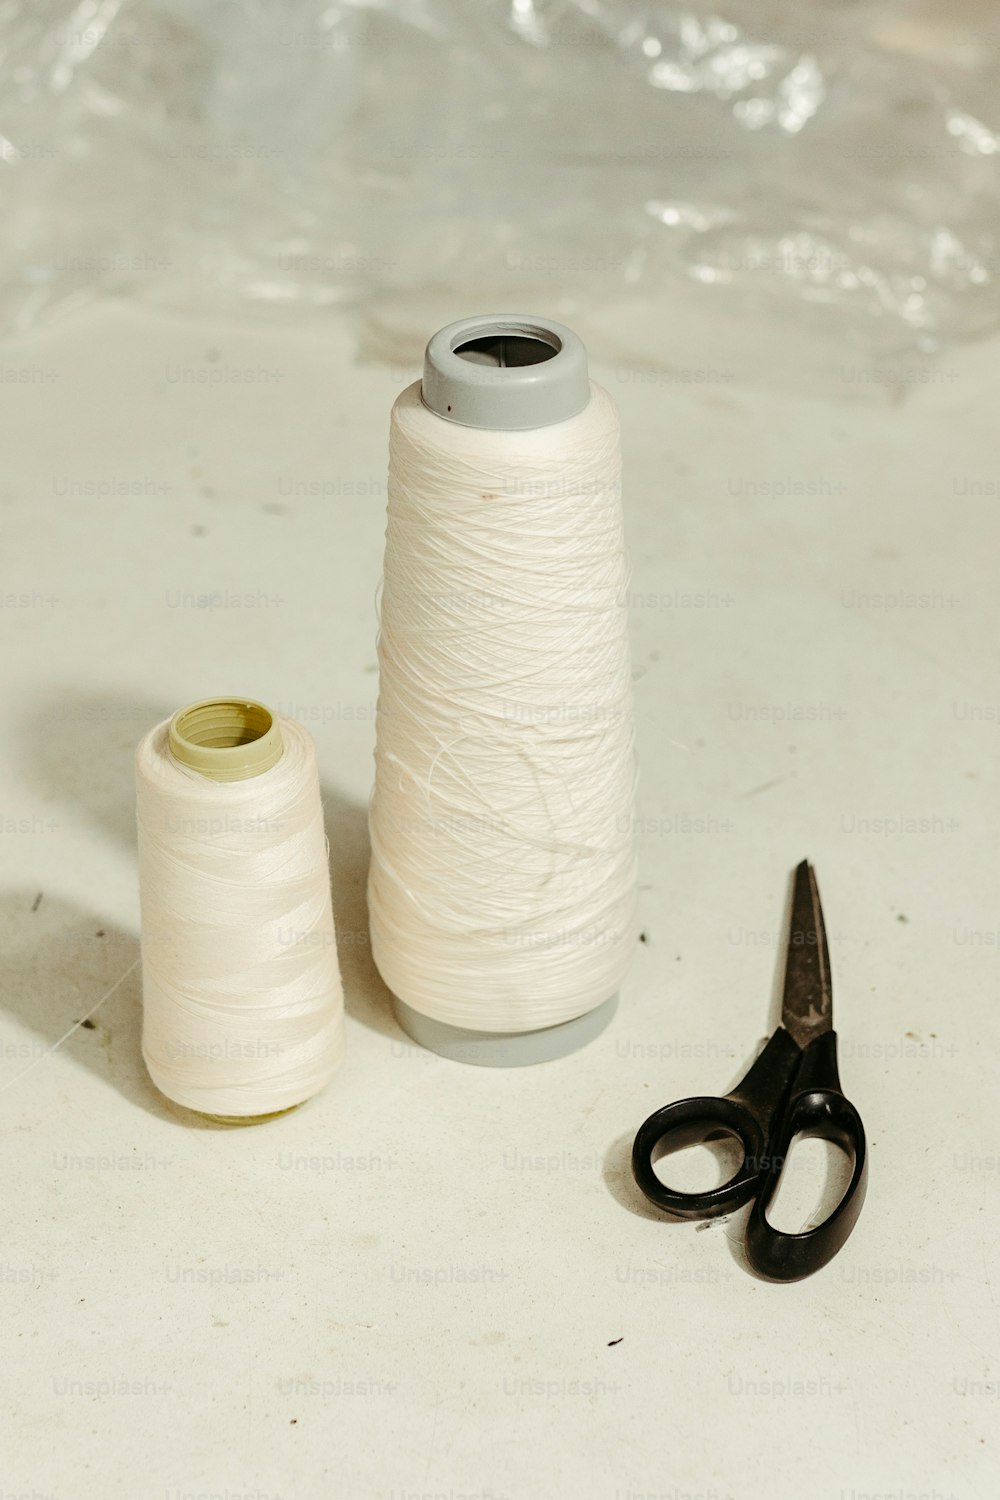 a pair of scissors and a spool of thread